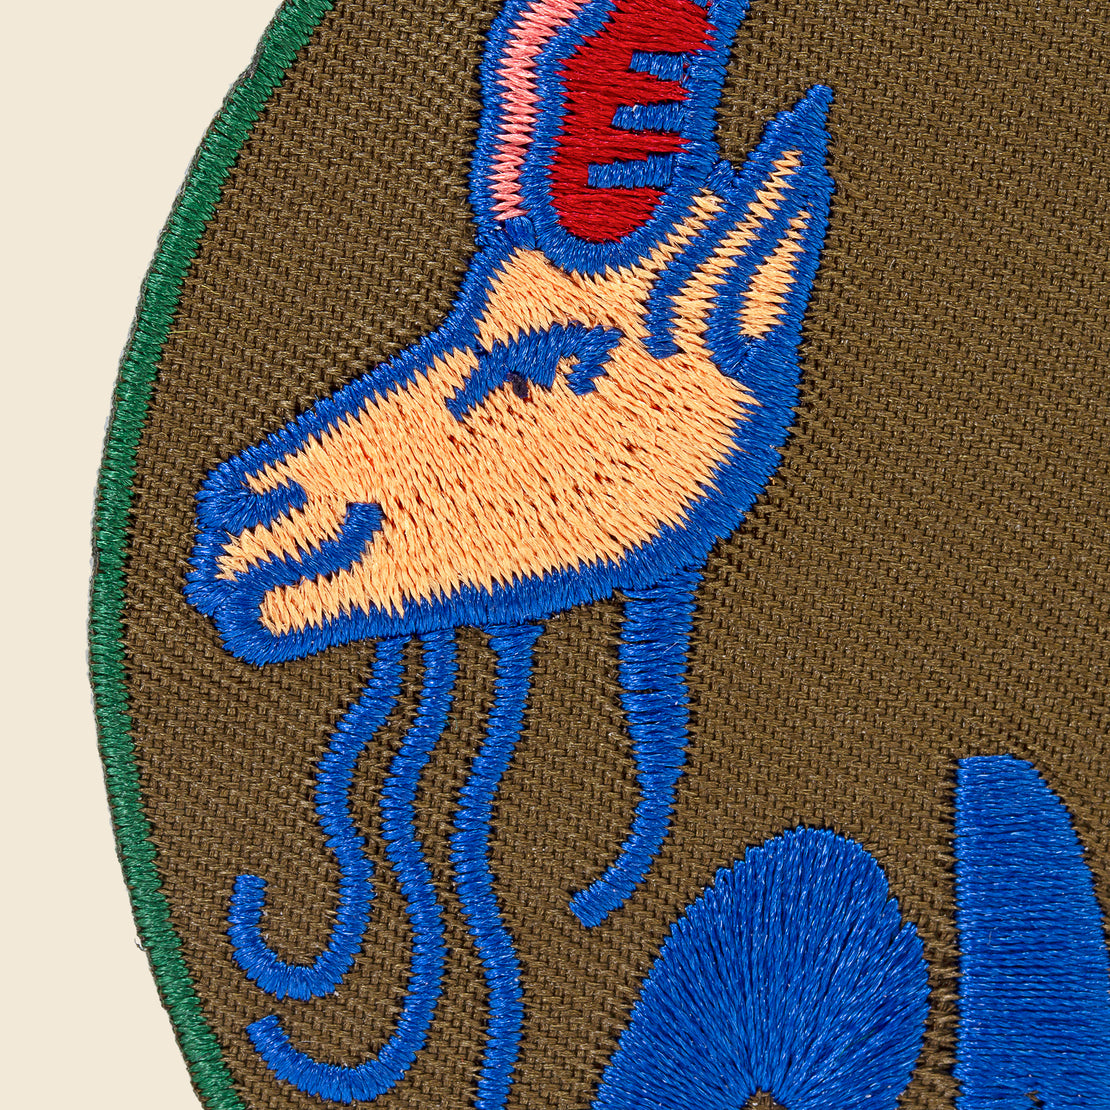 Astrology Patch - Capricorn - Fort Lonesome - STAG Provisions - Accessories - Patches